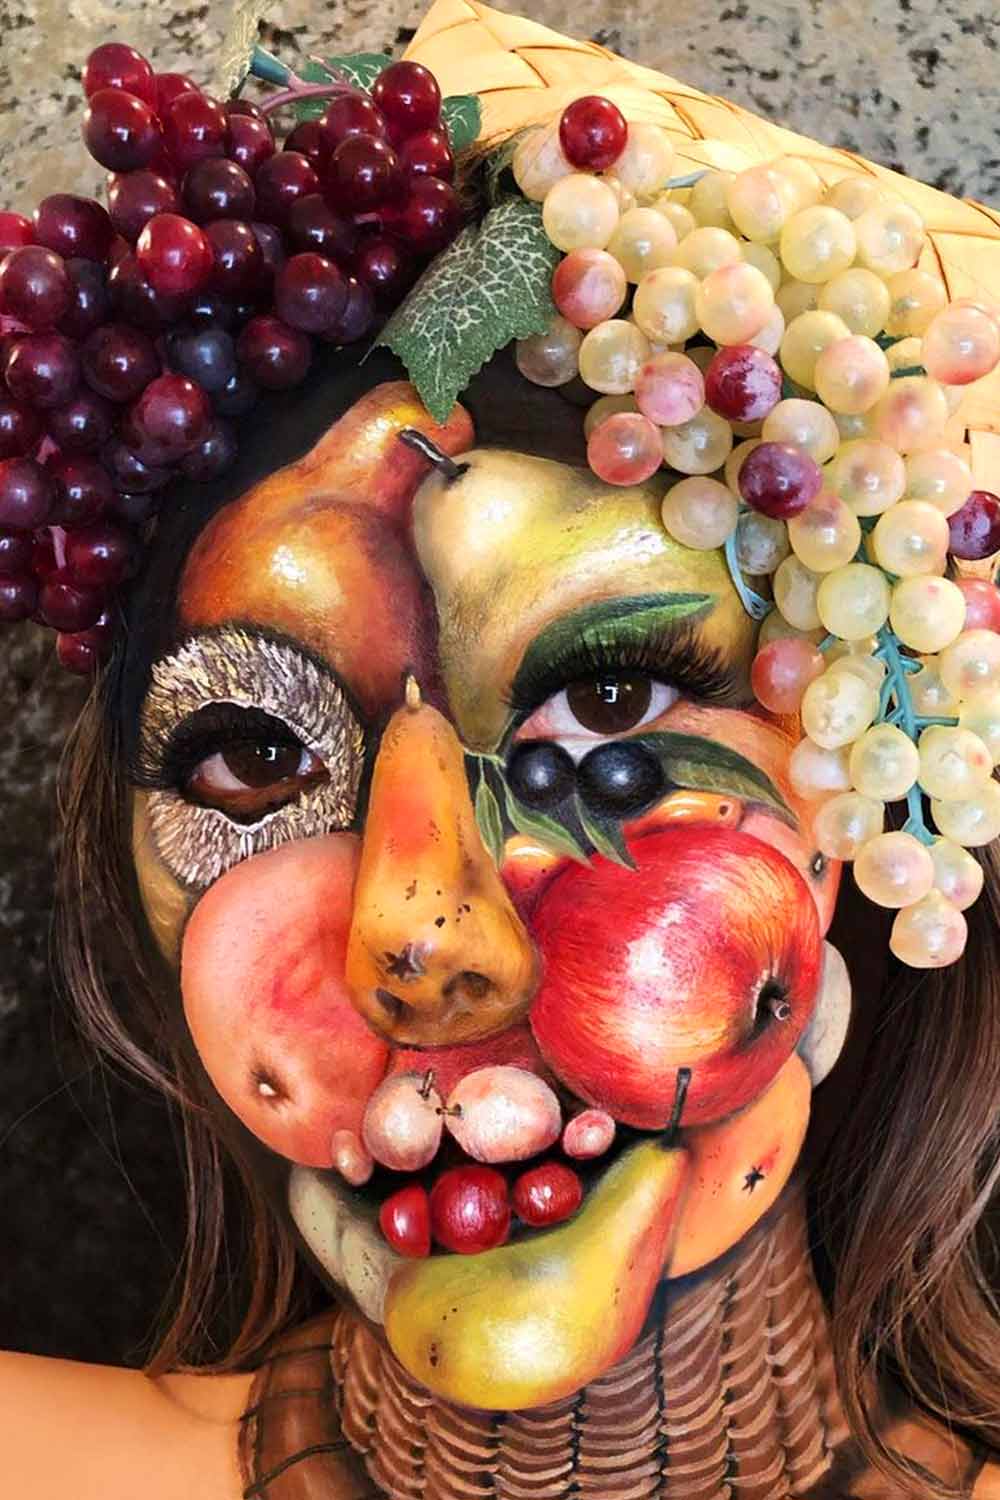 Fantasy and Tasty Makeup Ideas with Fruits